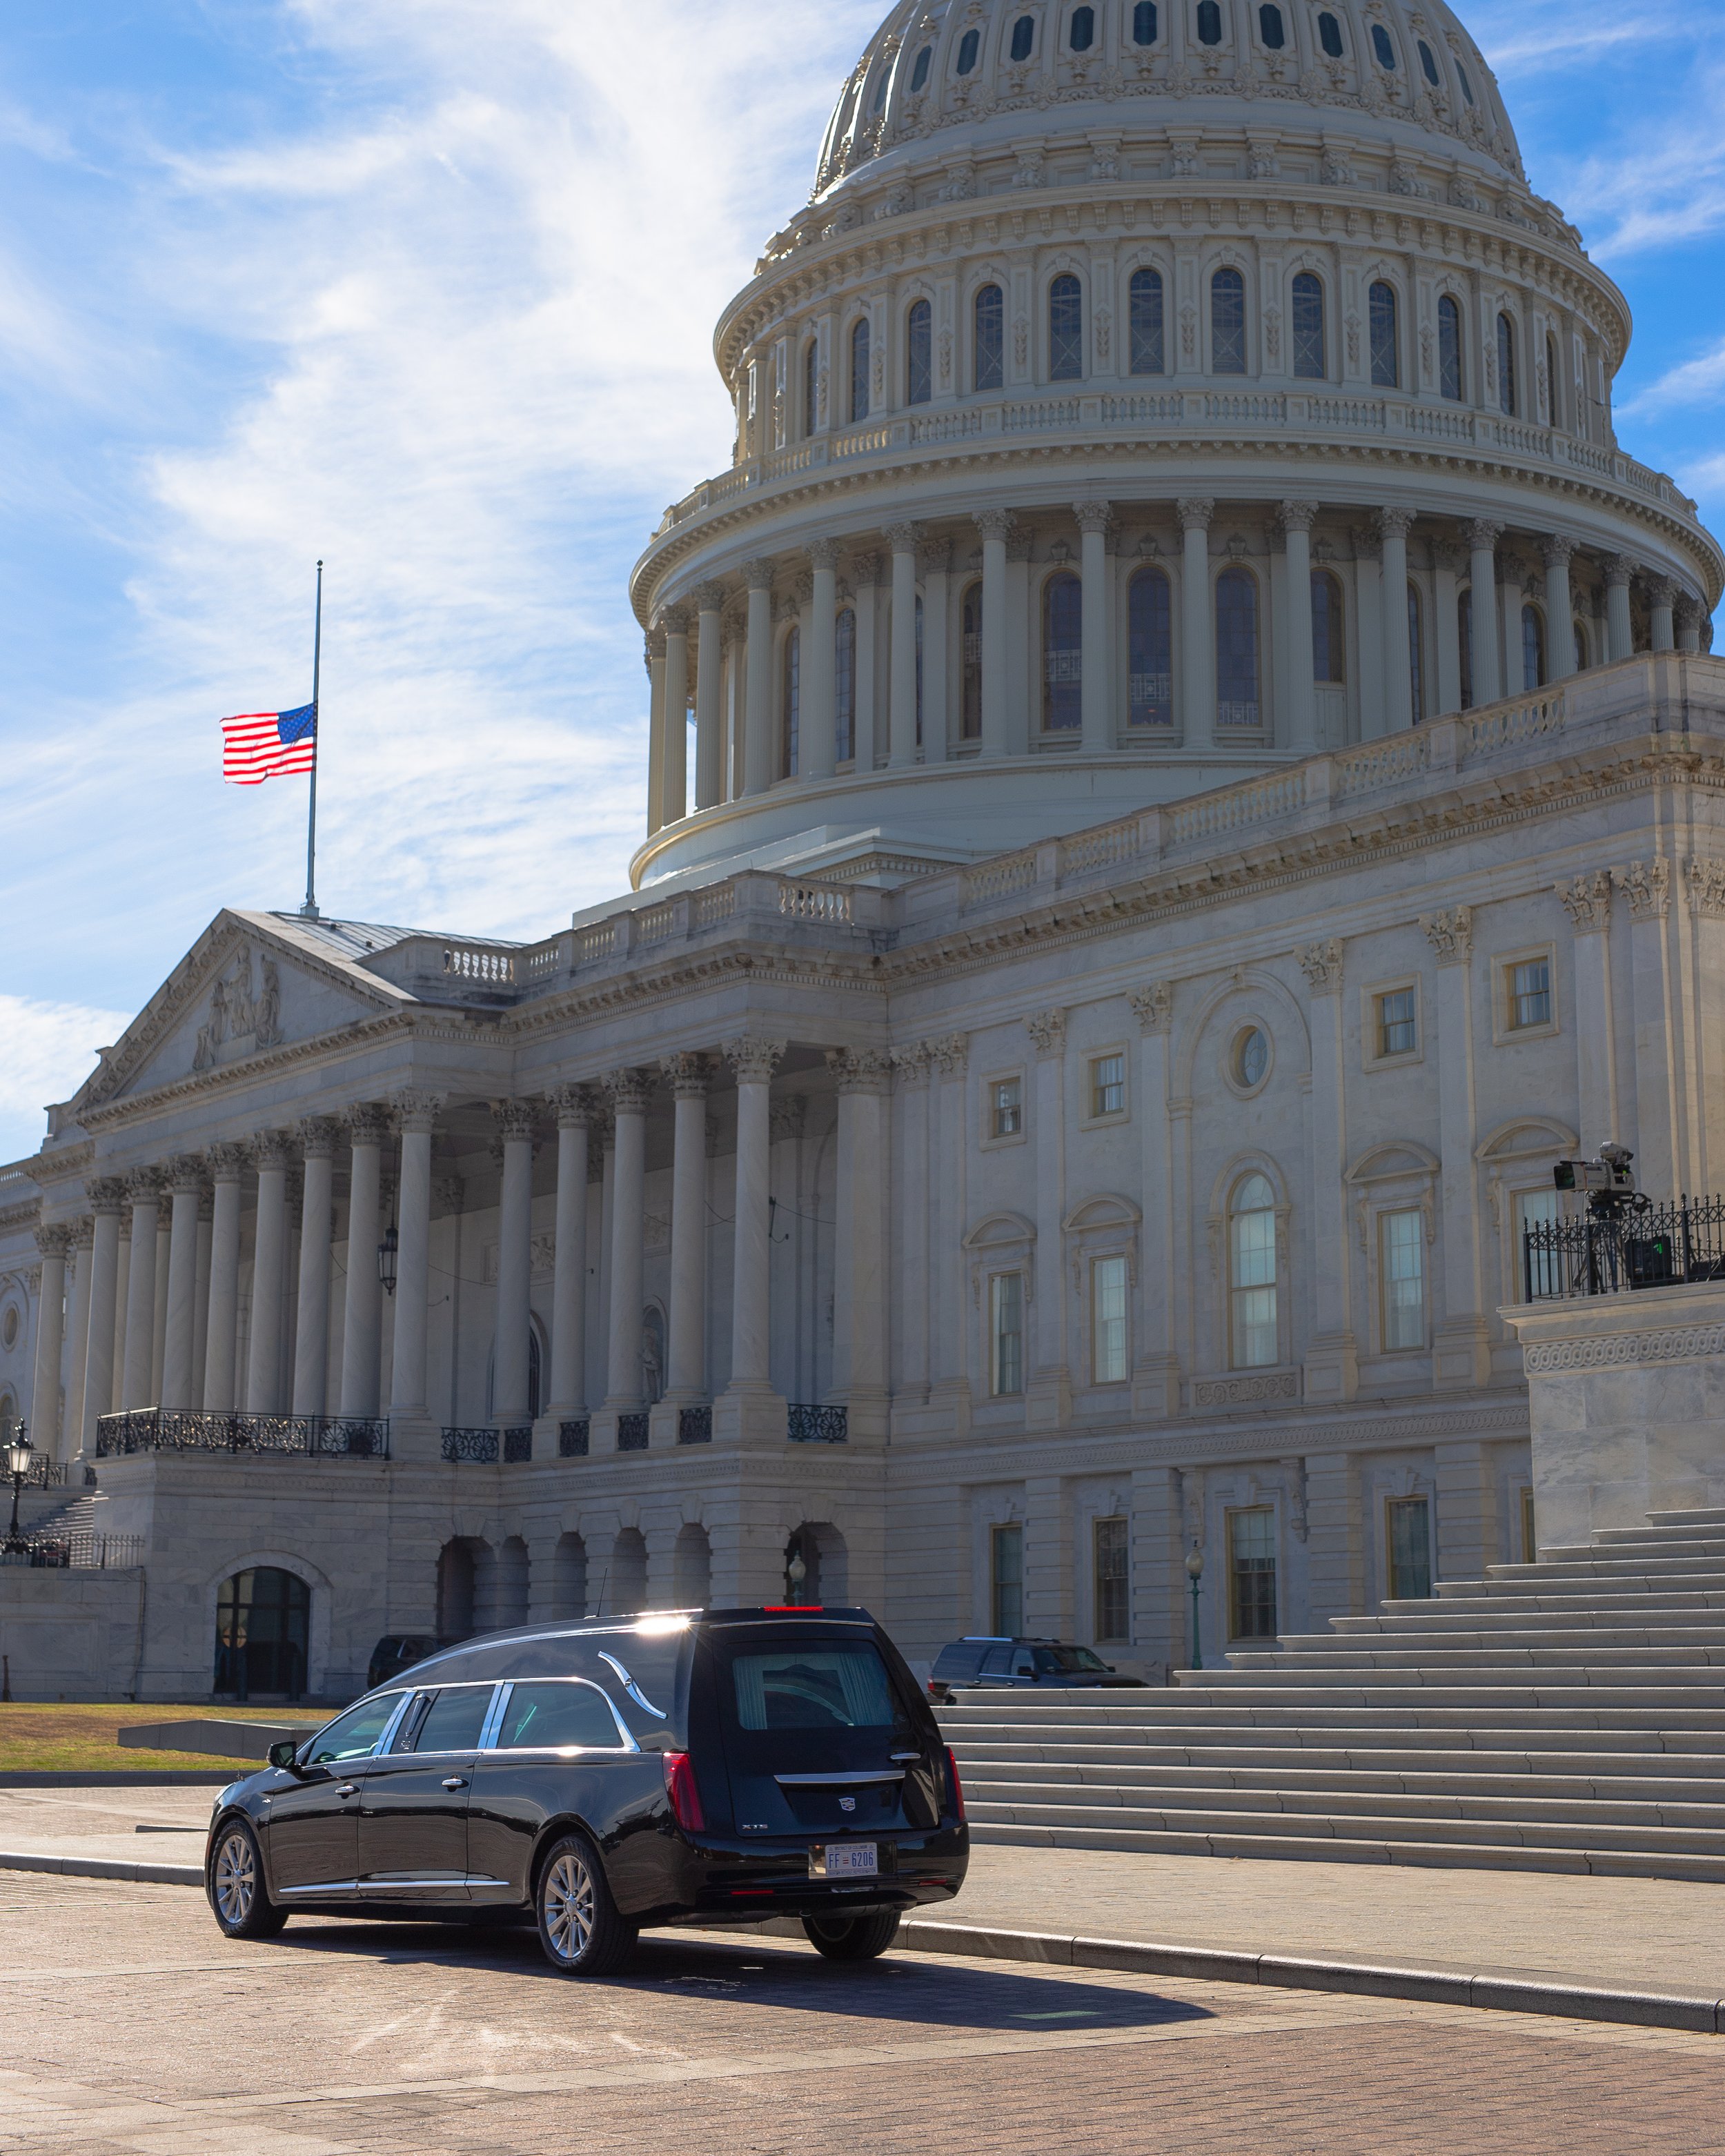  A hearse waits outside prior to the delivery of President George H.W. Bush’s Casket to the Capitol Rotunda. 